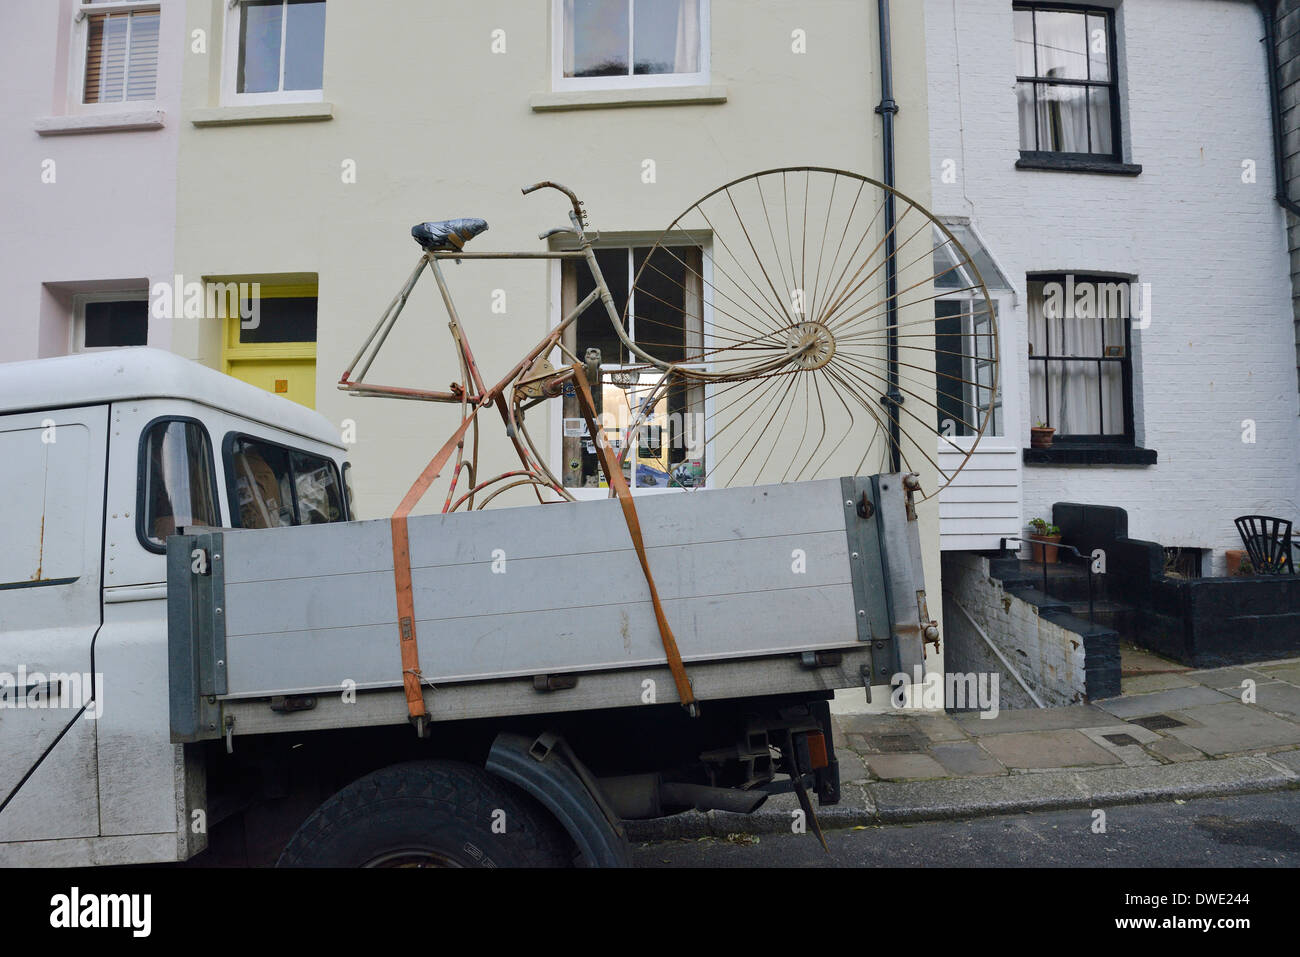 A parked truck carrying an unusual  large bicycle Stock Photo